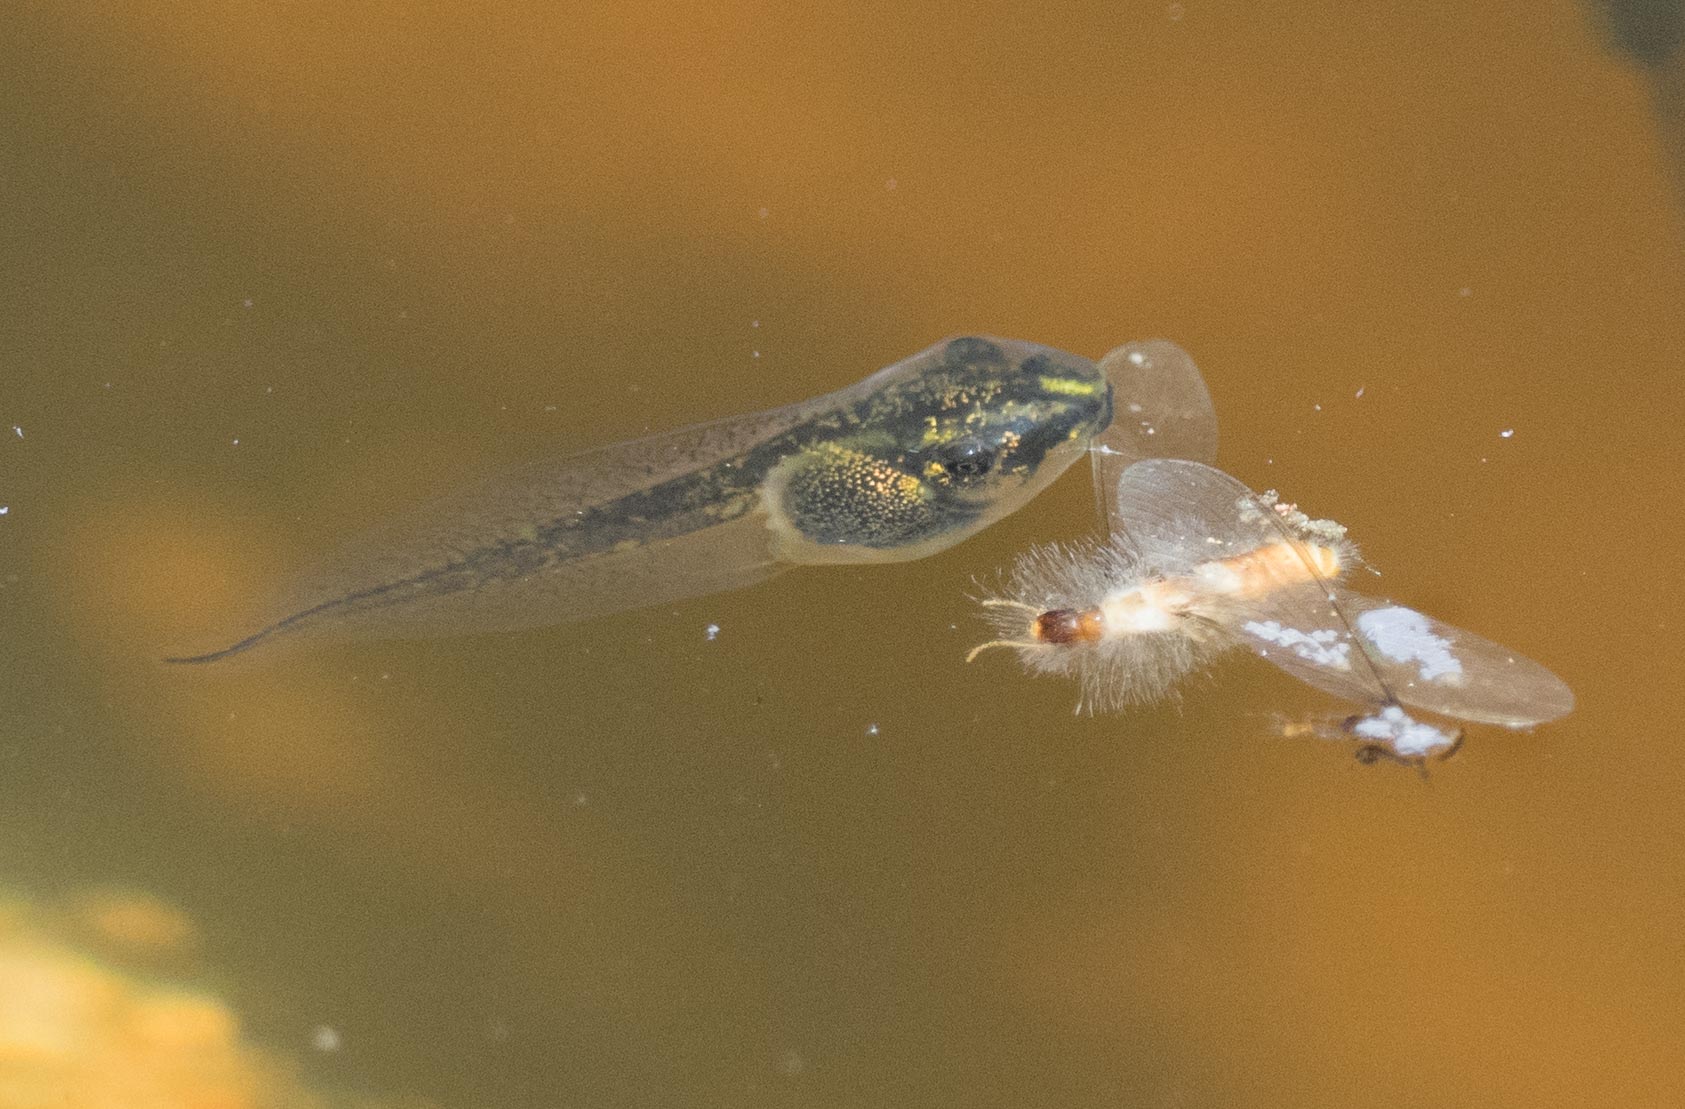 Southern Brown Tree Frog tadpole, feeding on fungi growing on a drowned flying termite - a food chain!